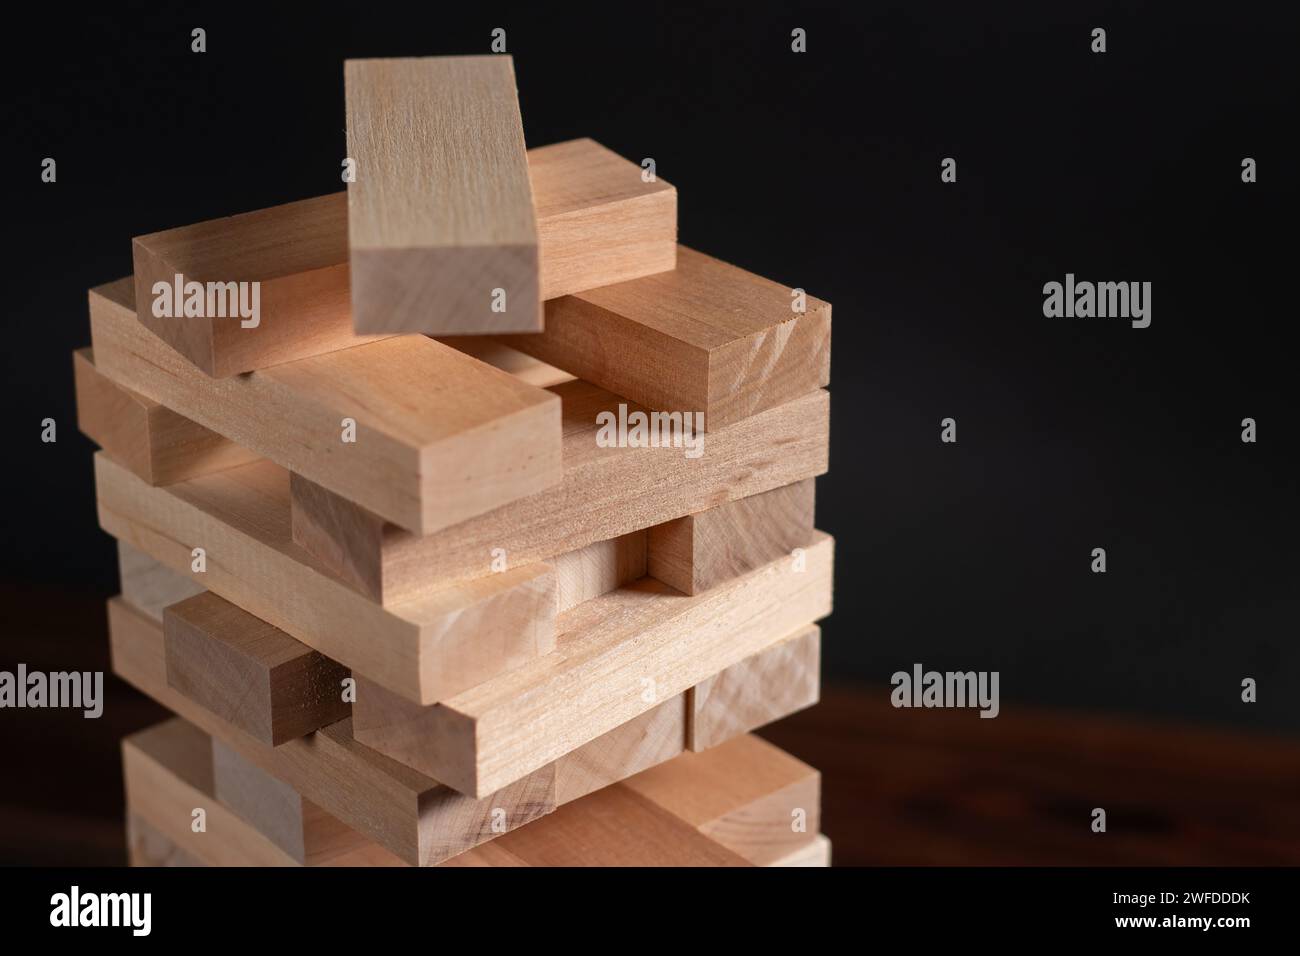 Jenga tower made of wooden blocks on dark background, space for text. Stock Photo